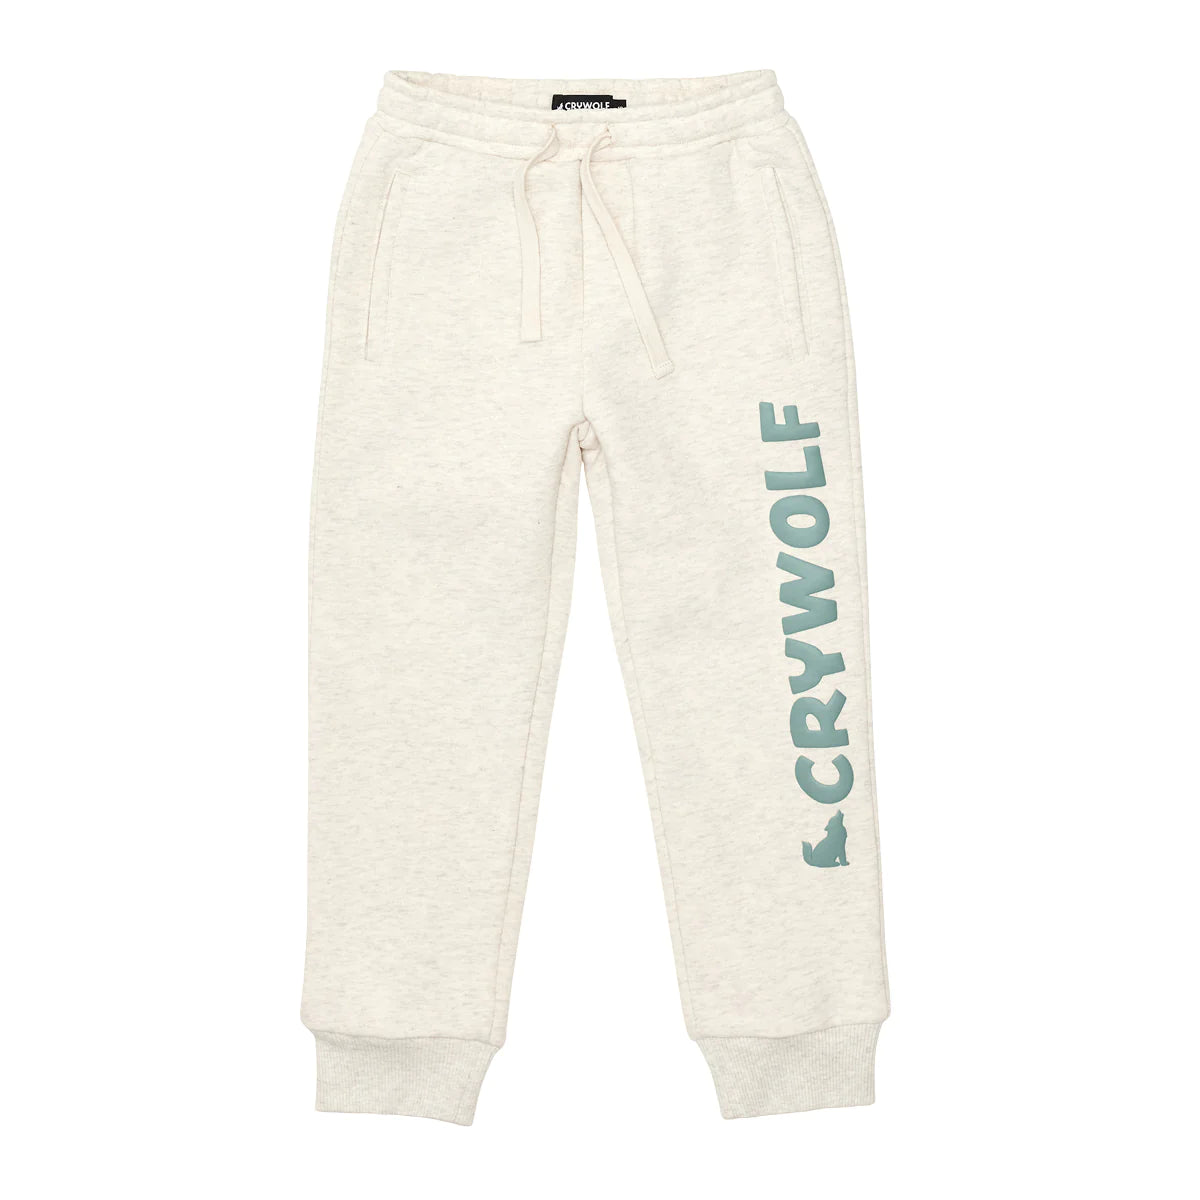 Crywolf Chill Track Pant